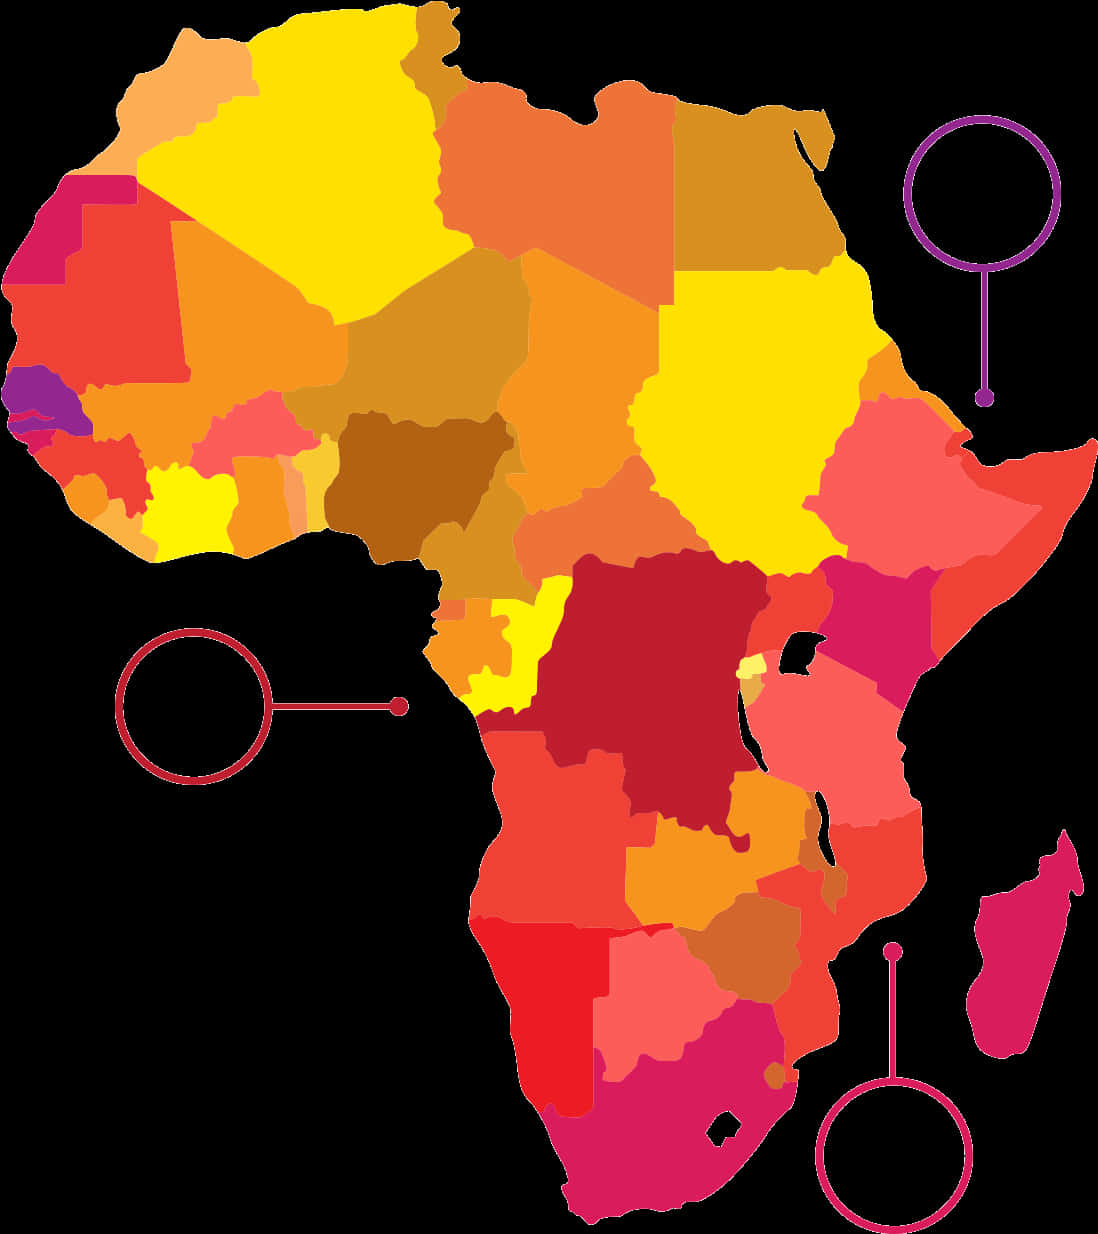 Abstract Africa Map Colorful